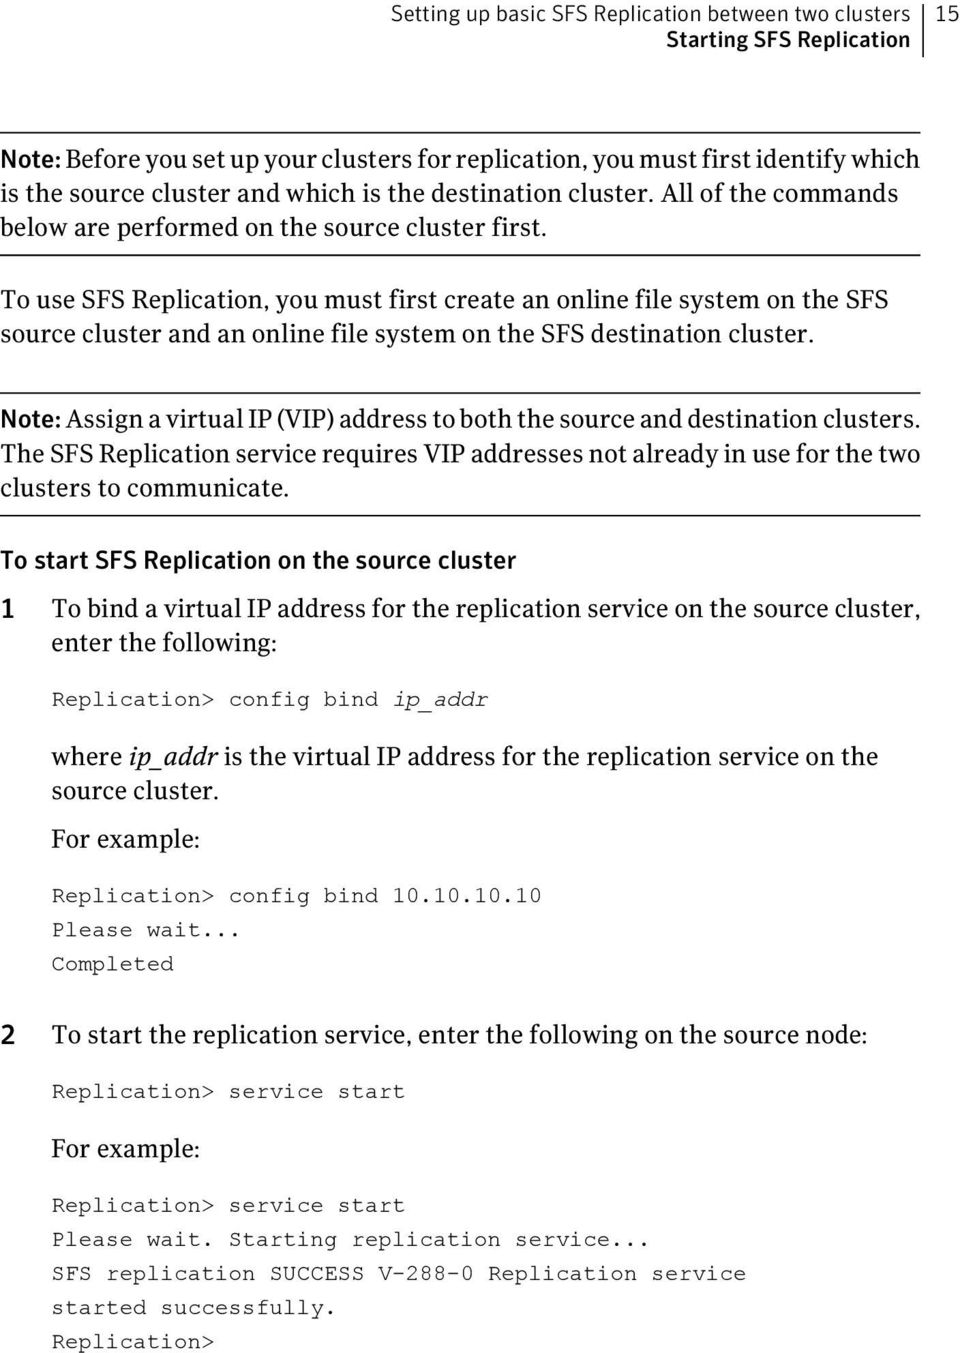 To use SFS Replication, you must first create an online file system on the SFS source cluster and an online file system on the SFS destination cluster.